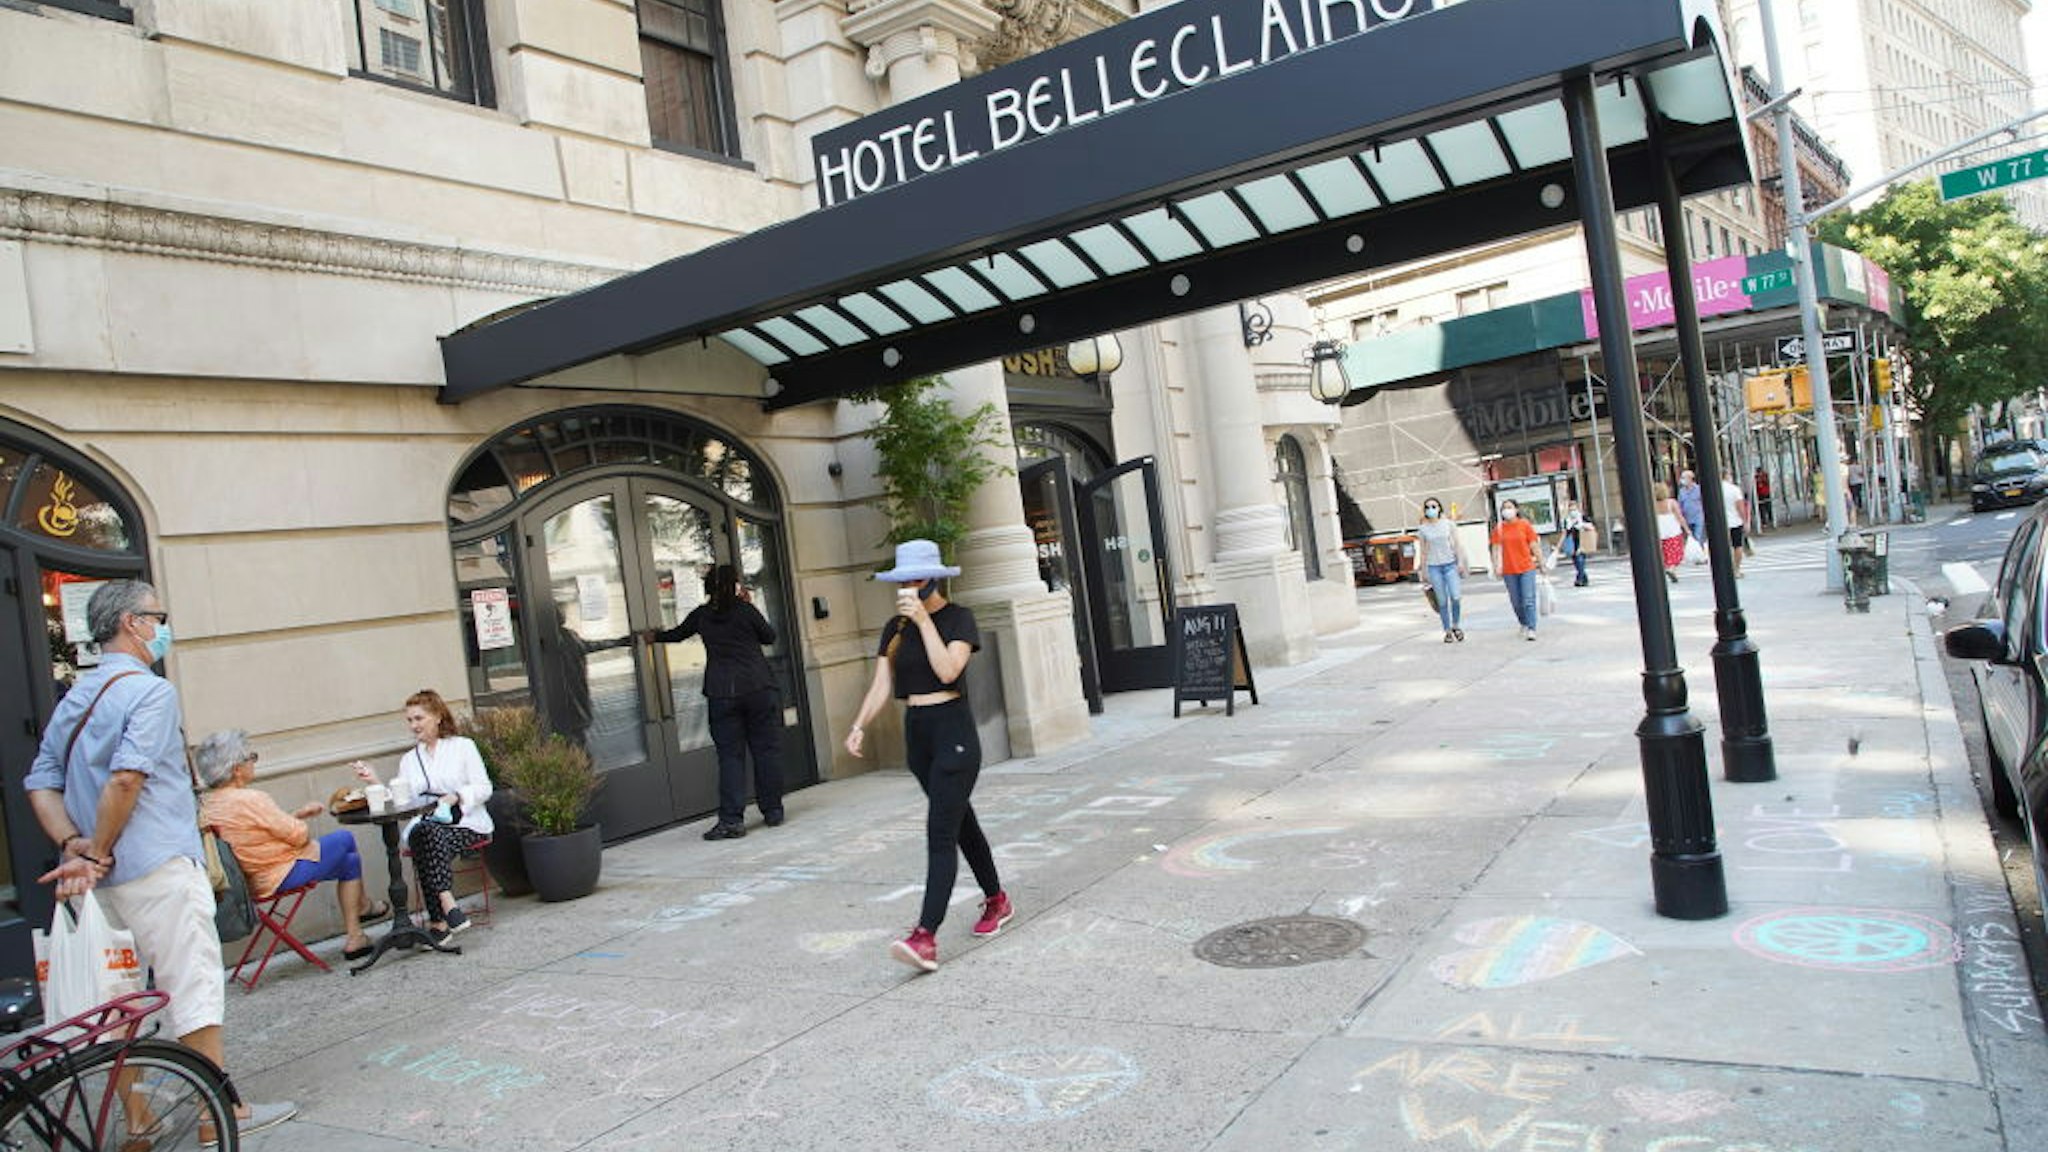 "All are welcome" is written in chalk on the pavement at Hotel Belleclaire on the Upper West Side of Manhattan